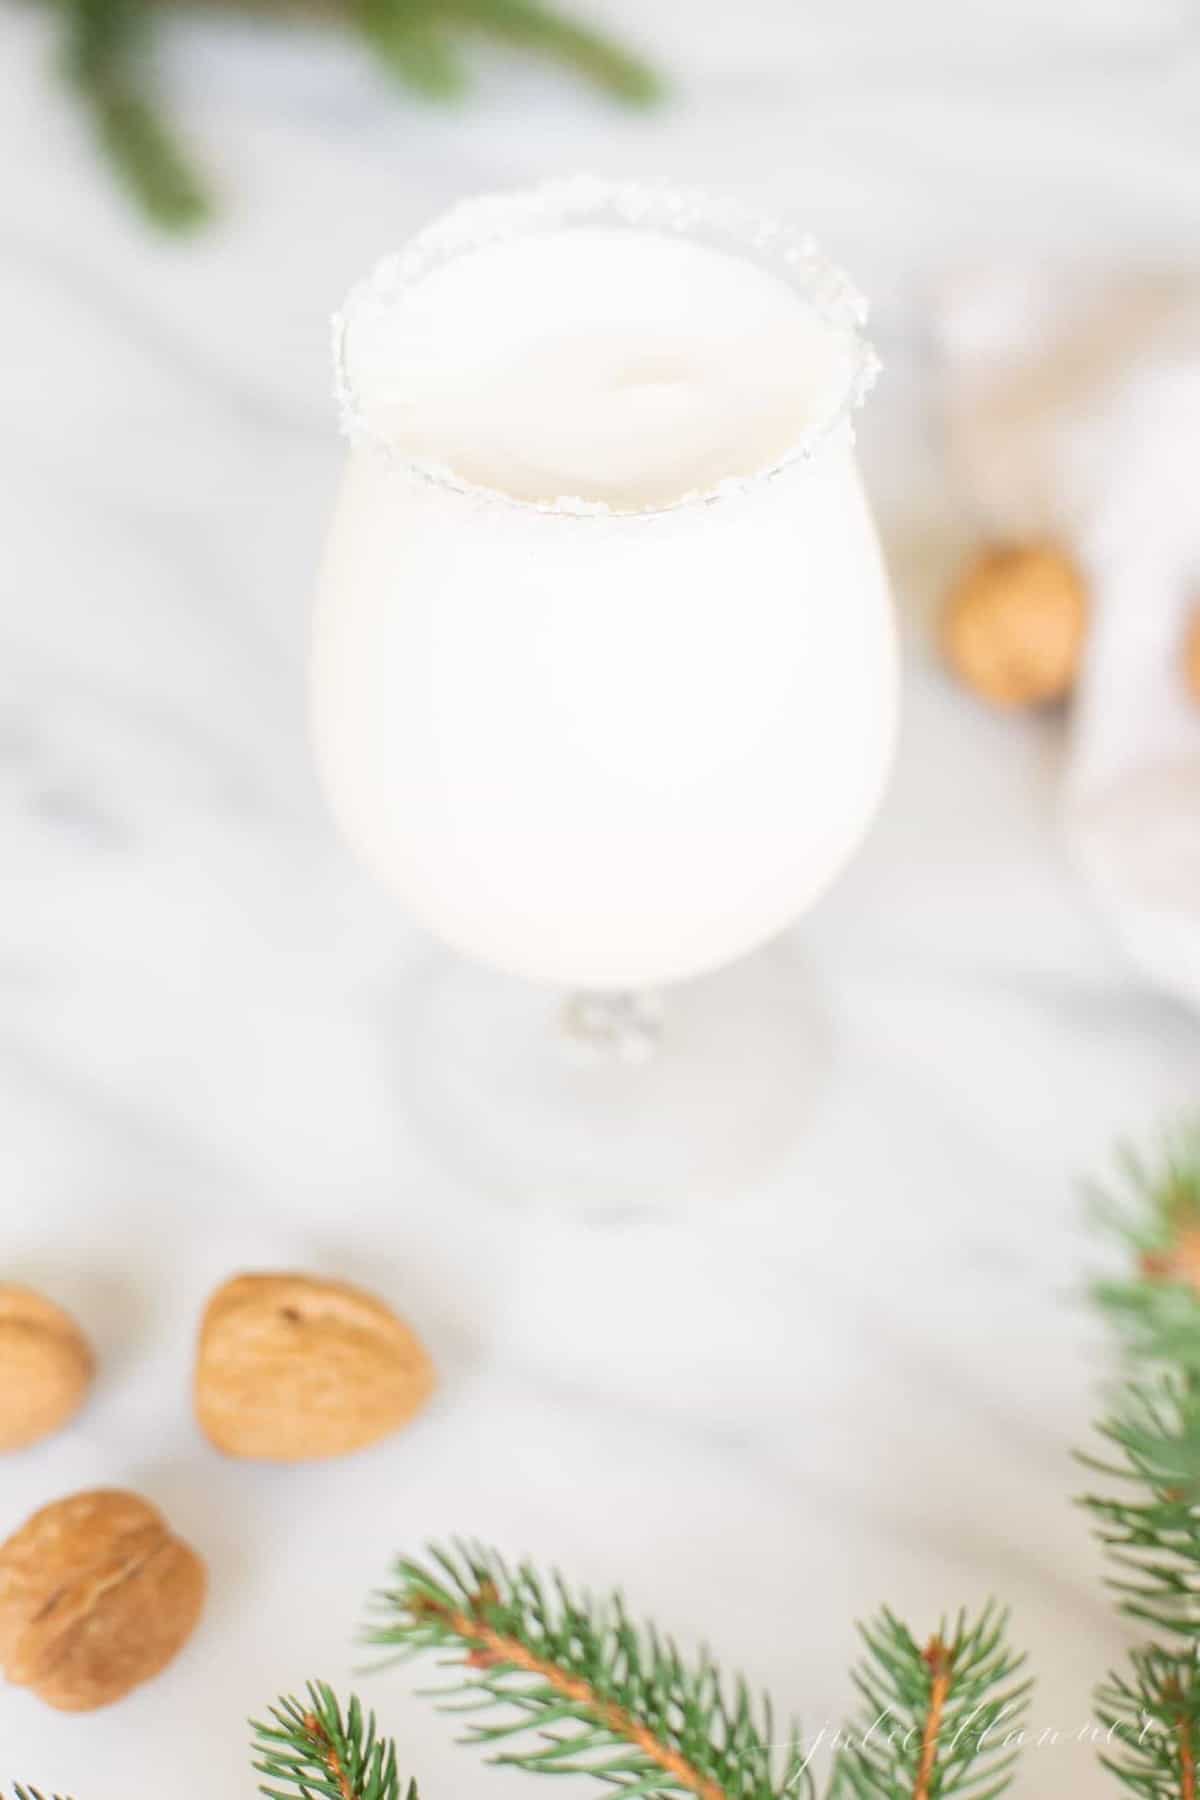 Marble surface with a clear glass filled with a snowball drink, rimmed in sugar, with chestnuts and evergreen touches around.